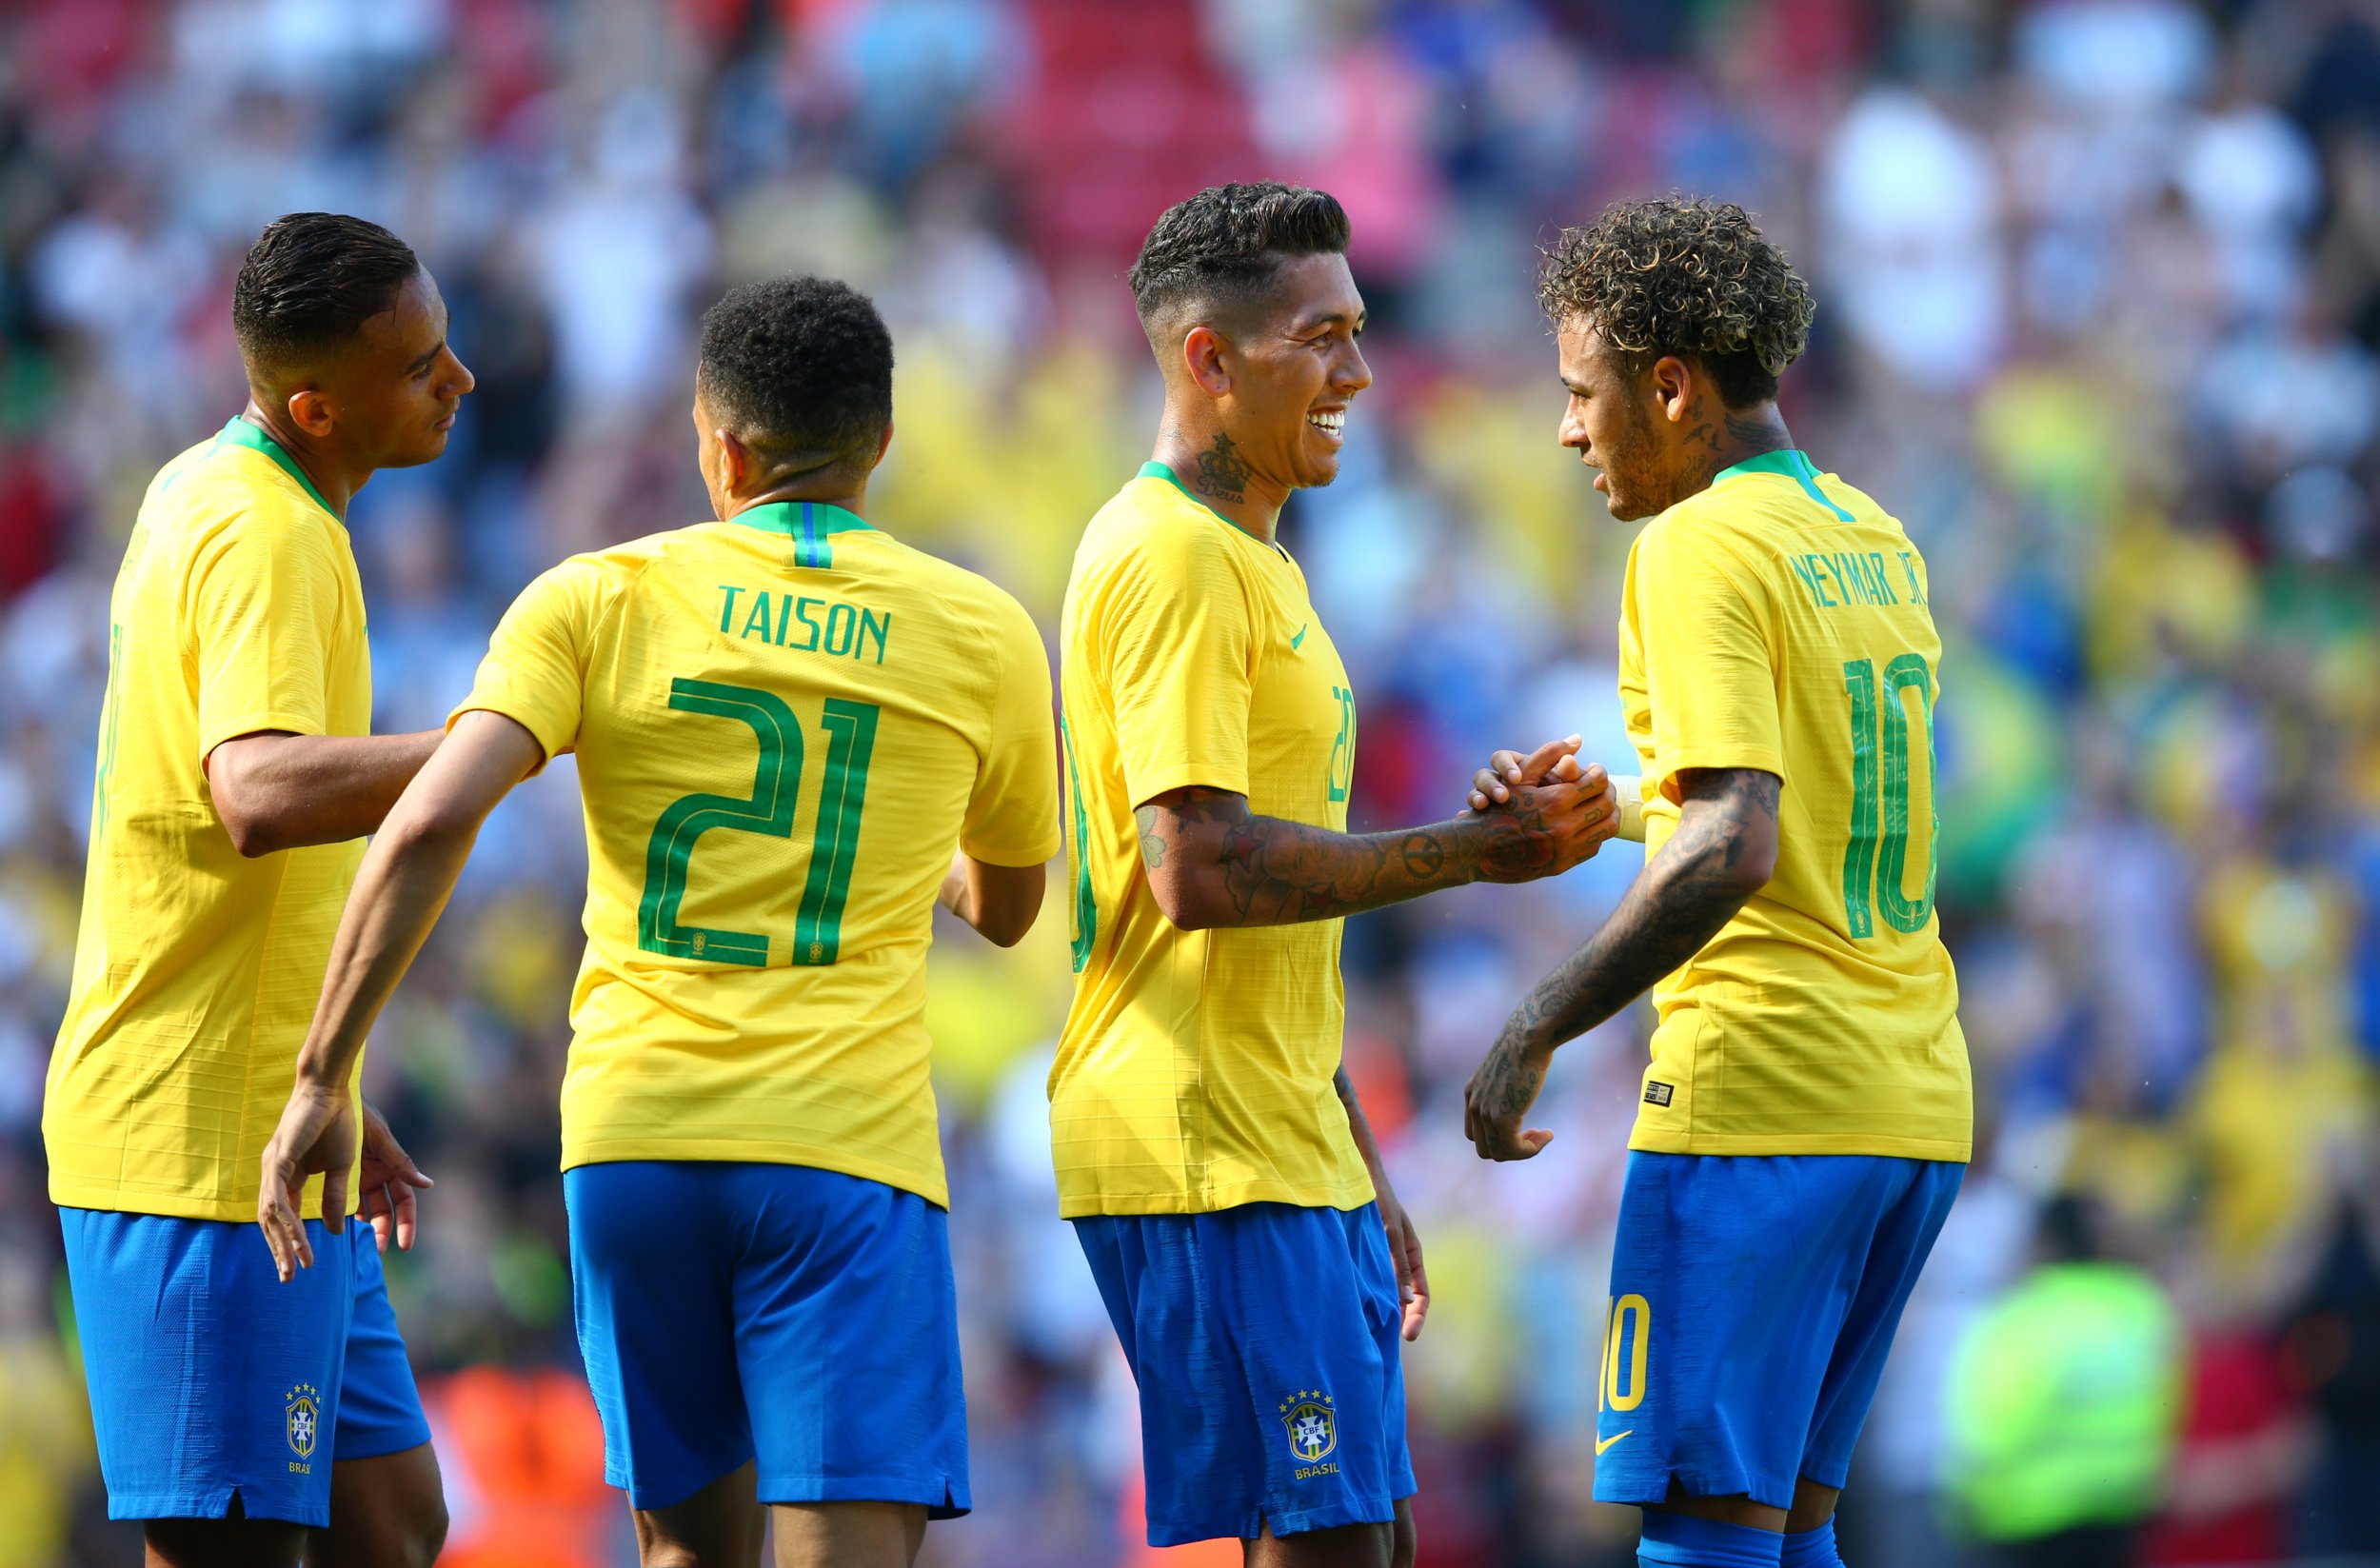 World Cup 2018 Betting Odds Who Is Favored To Win The Soccer Championship?